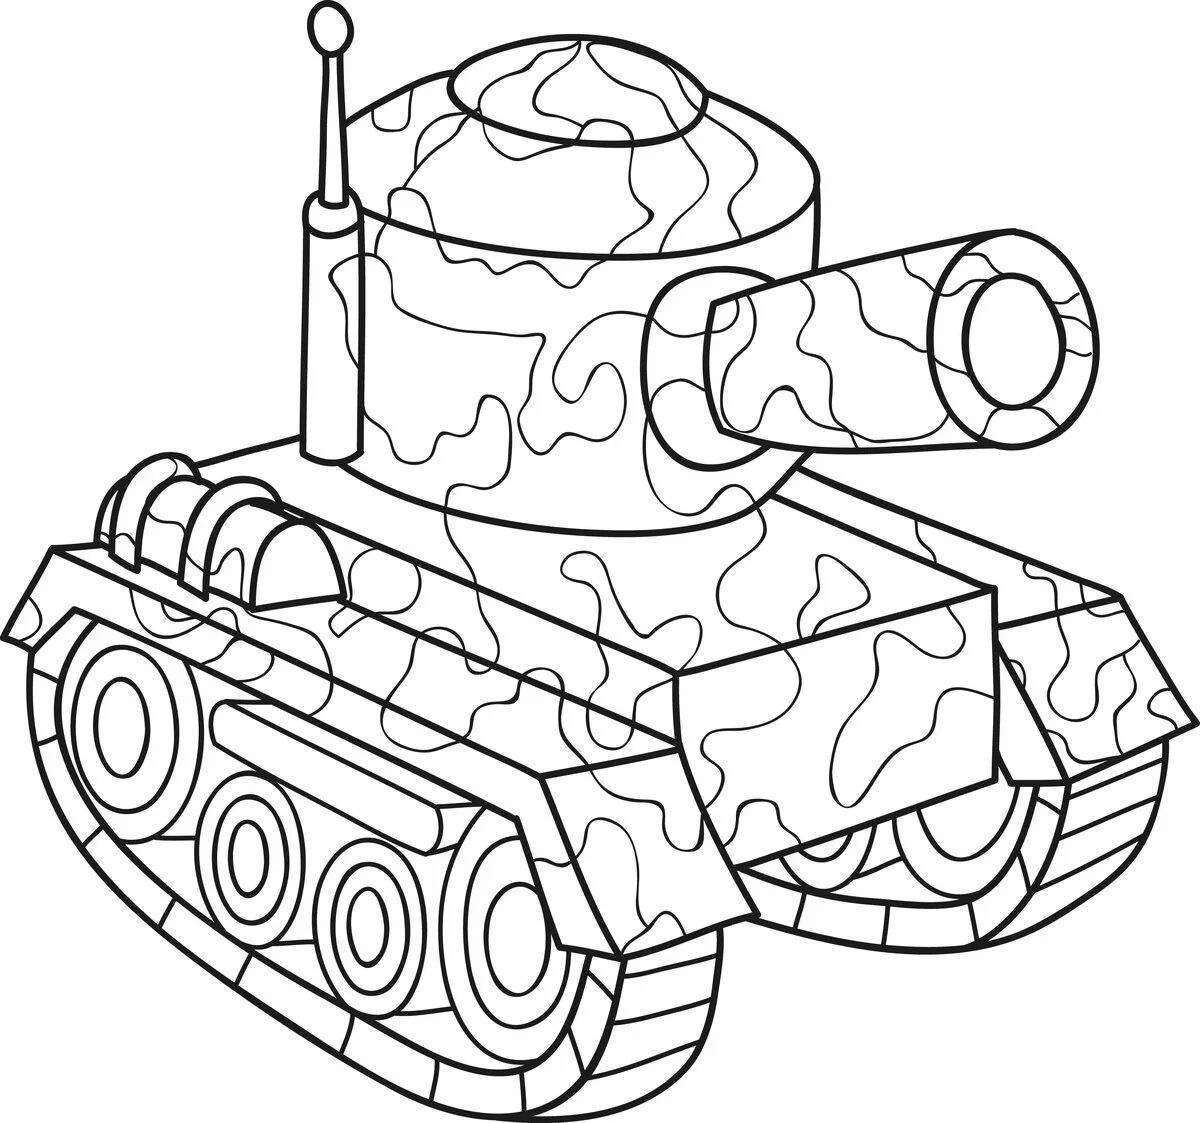 Exciting tank cartoon coloring for kids